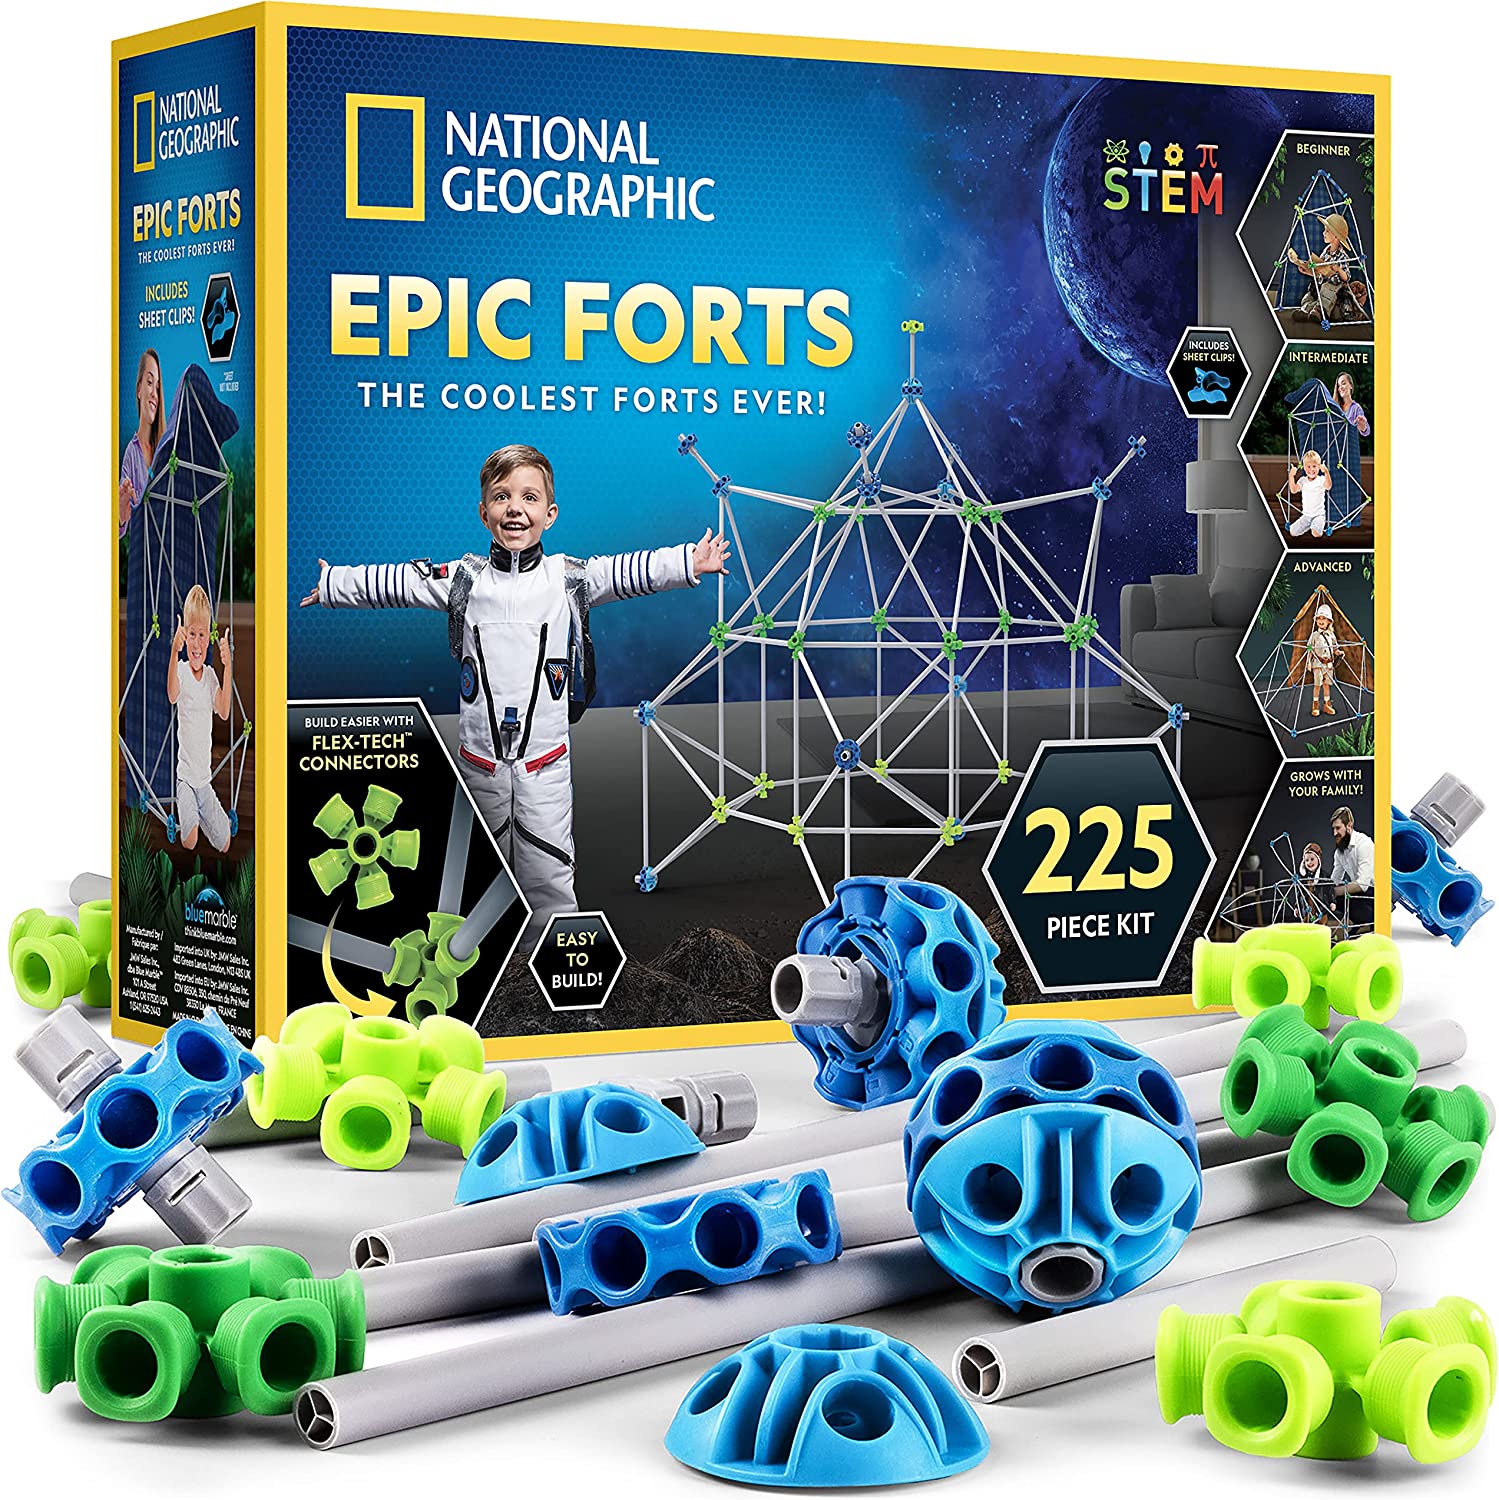 Epic Forts Building Kit by National Geographic